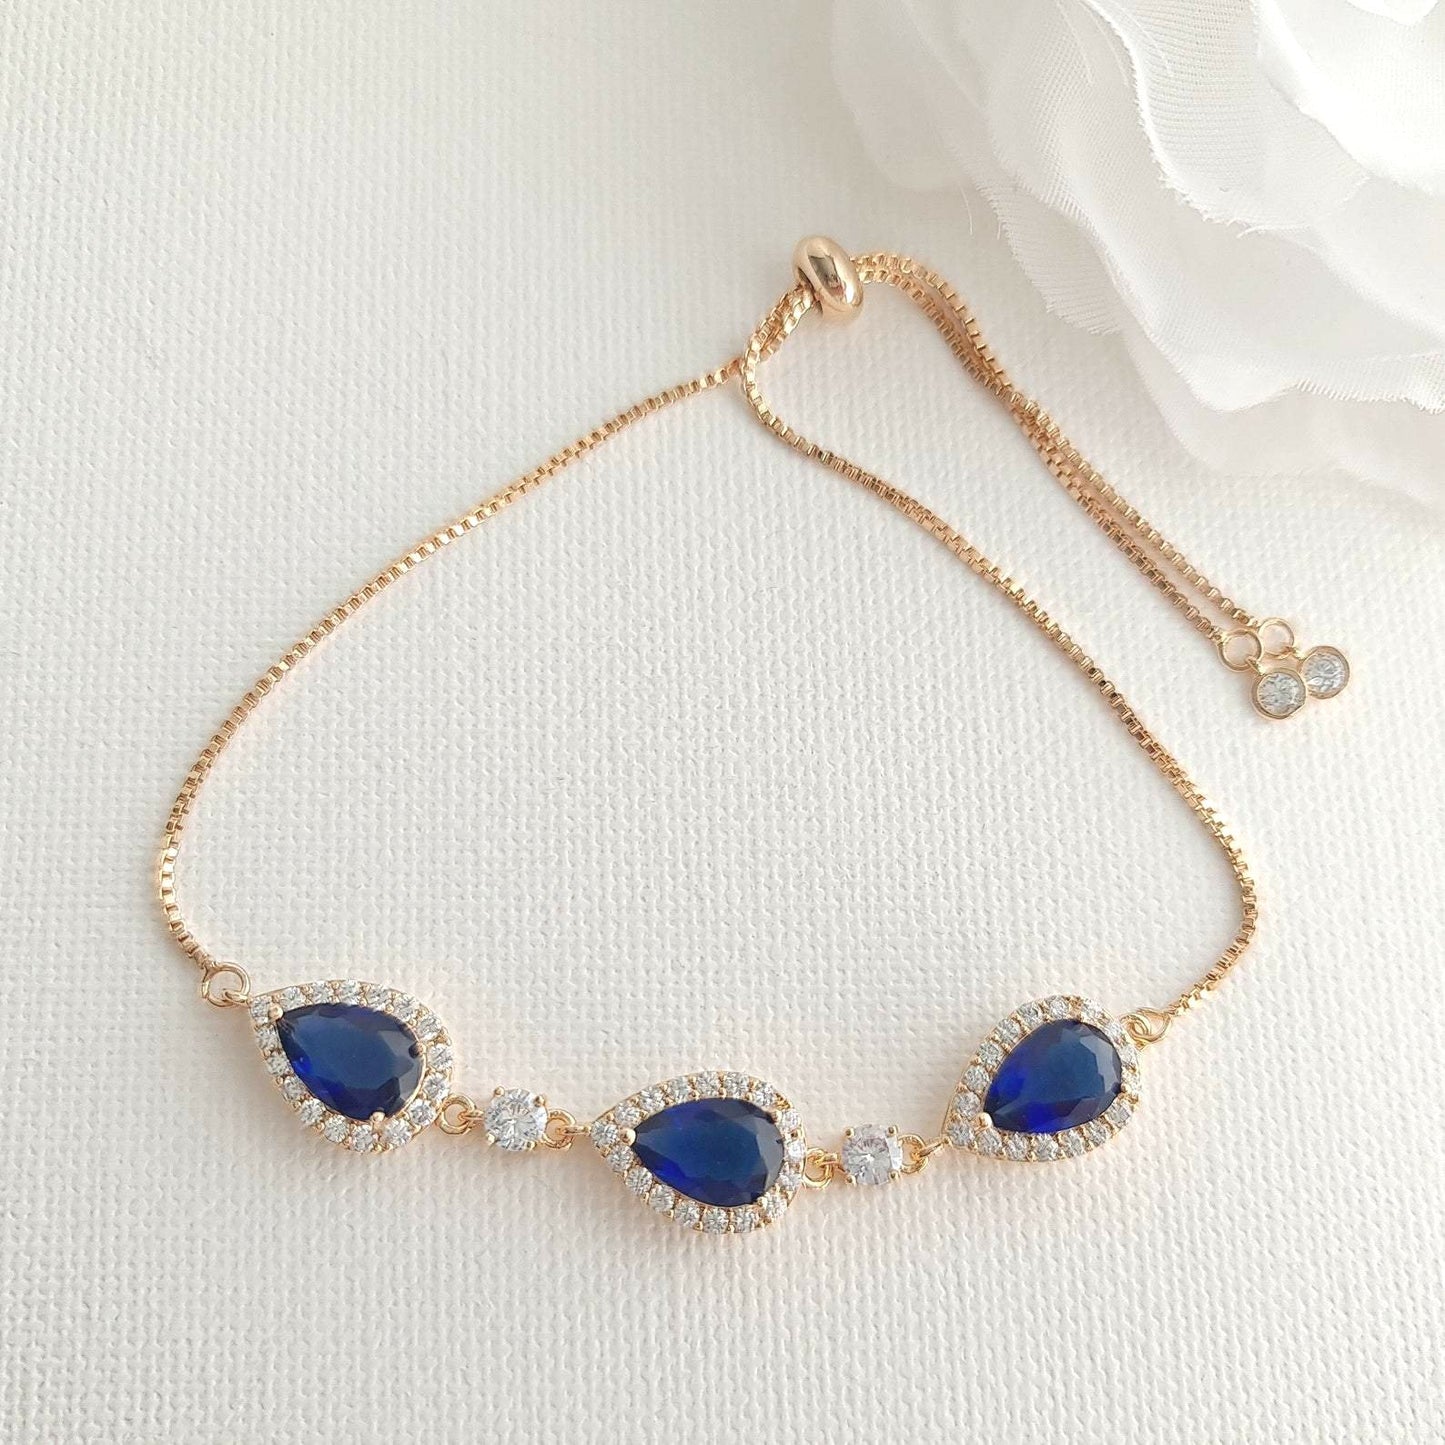 Bracelet in Sapphire Blue & Rose Gold for Bride & Bridesmaids-Aoi - PoetryDesigns